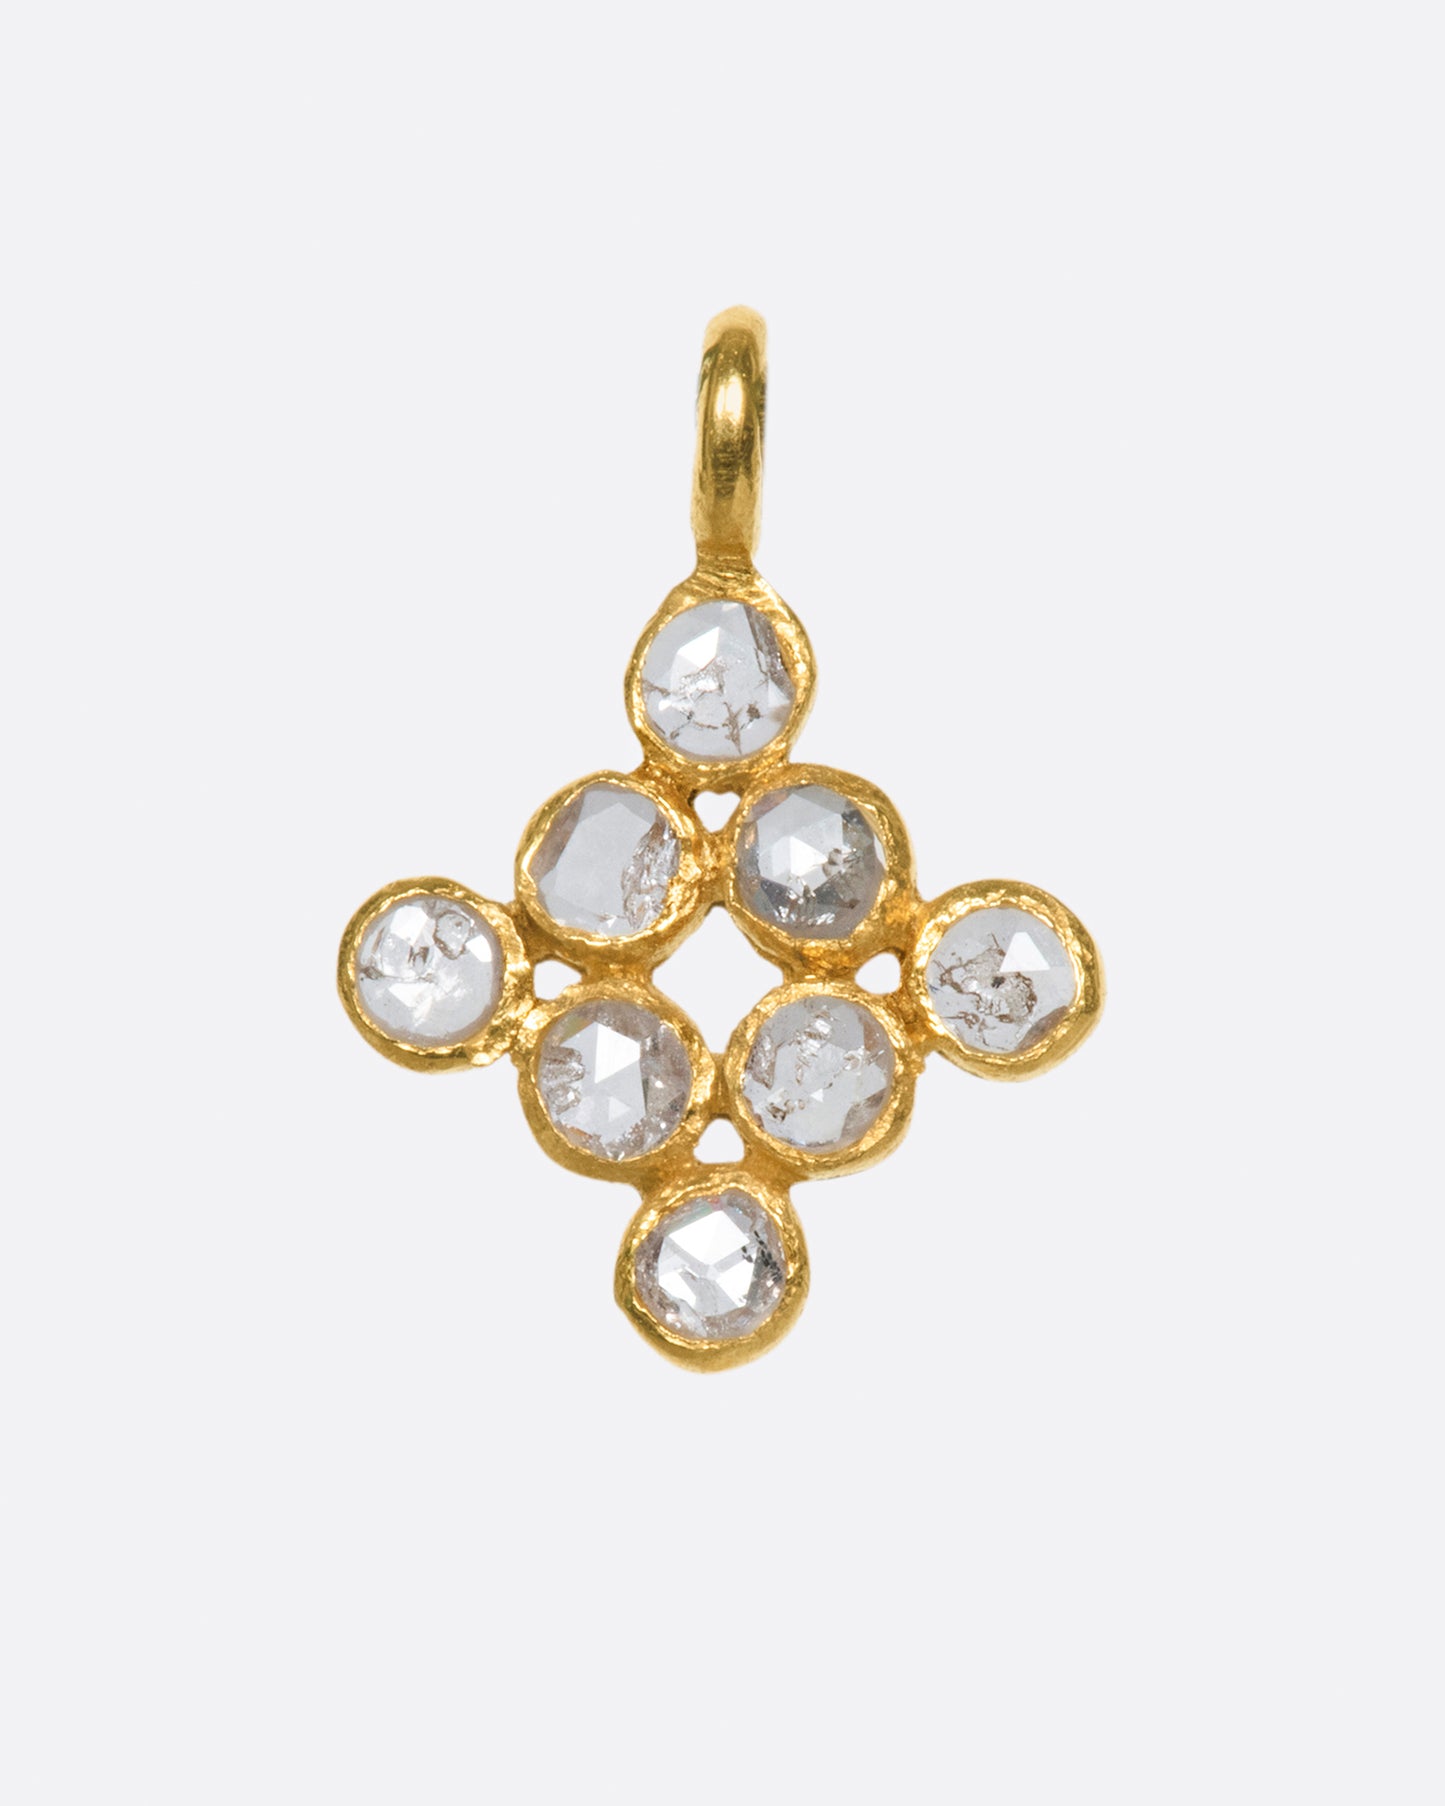 A symmetrical cluster of bezel set, rose cut diamonds; perfect to add some texture and shine to your ear without getting too glitzy (if there is such a thing).